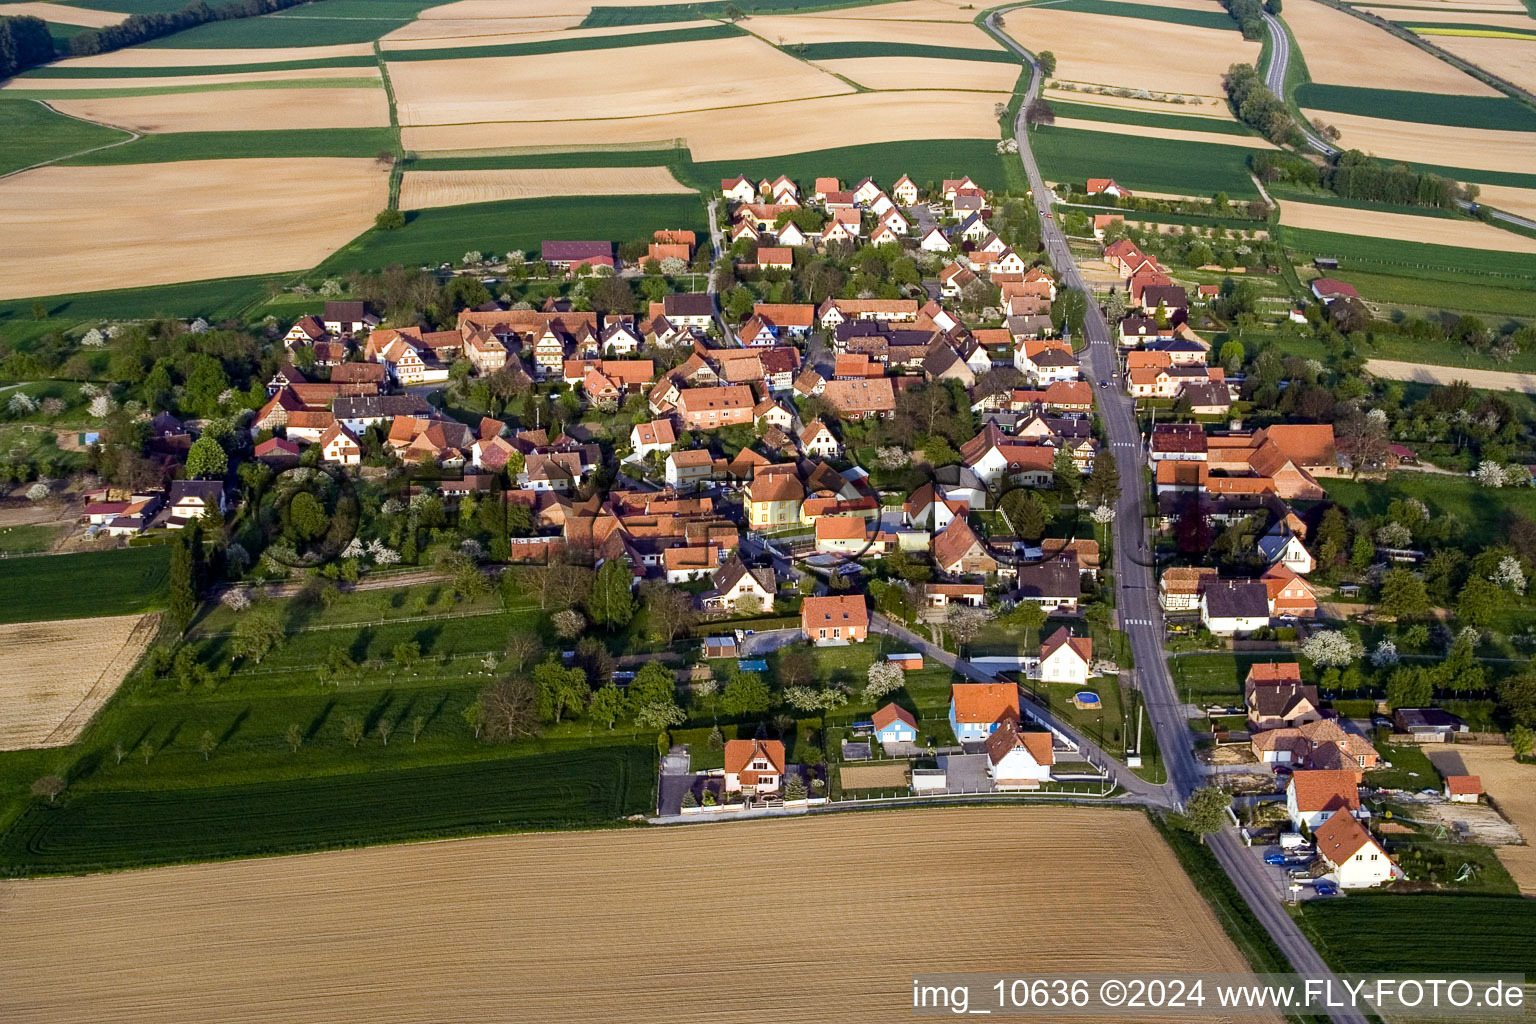 Aerial photograpy of Village - view on the edge of agricultural fields and farmland in Hoffen in Grand Est, France